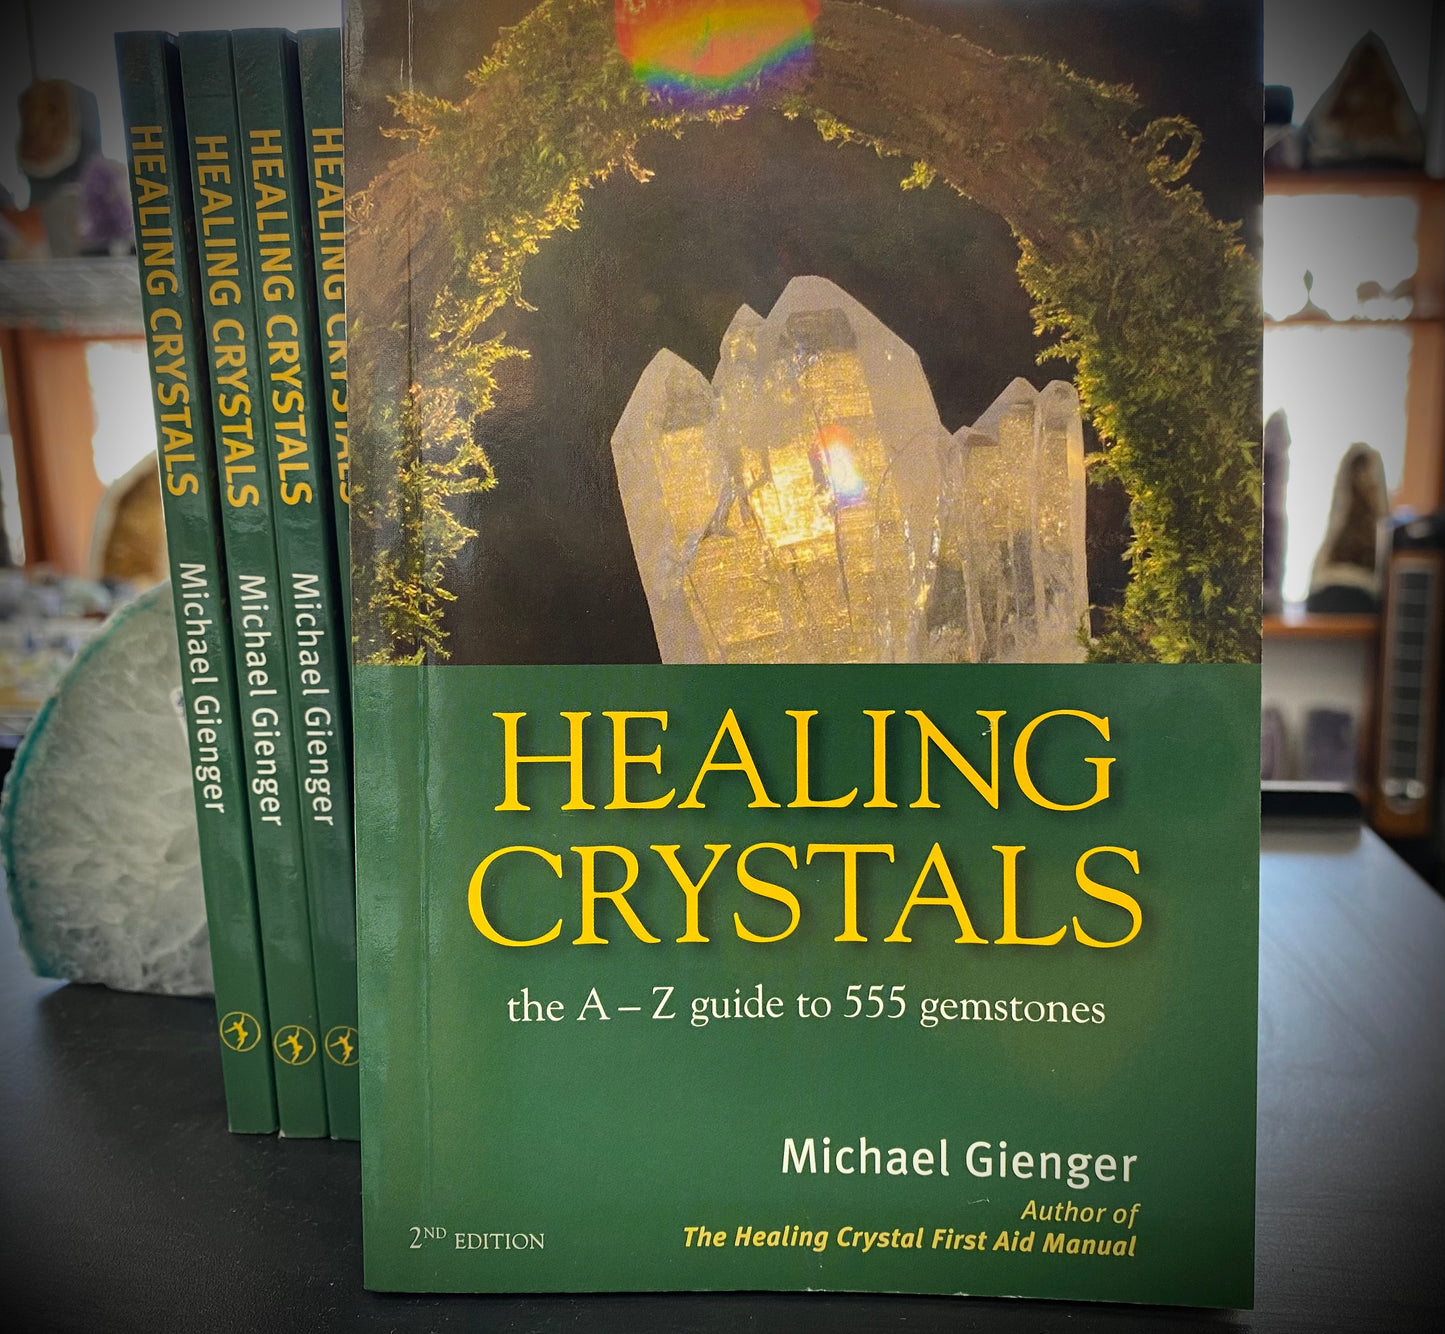 Healing Crystals The A -Z Guide to 555 Gemstones By Michael Gienger